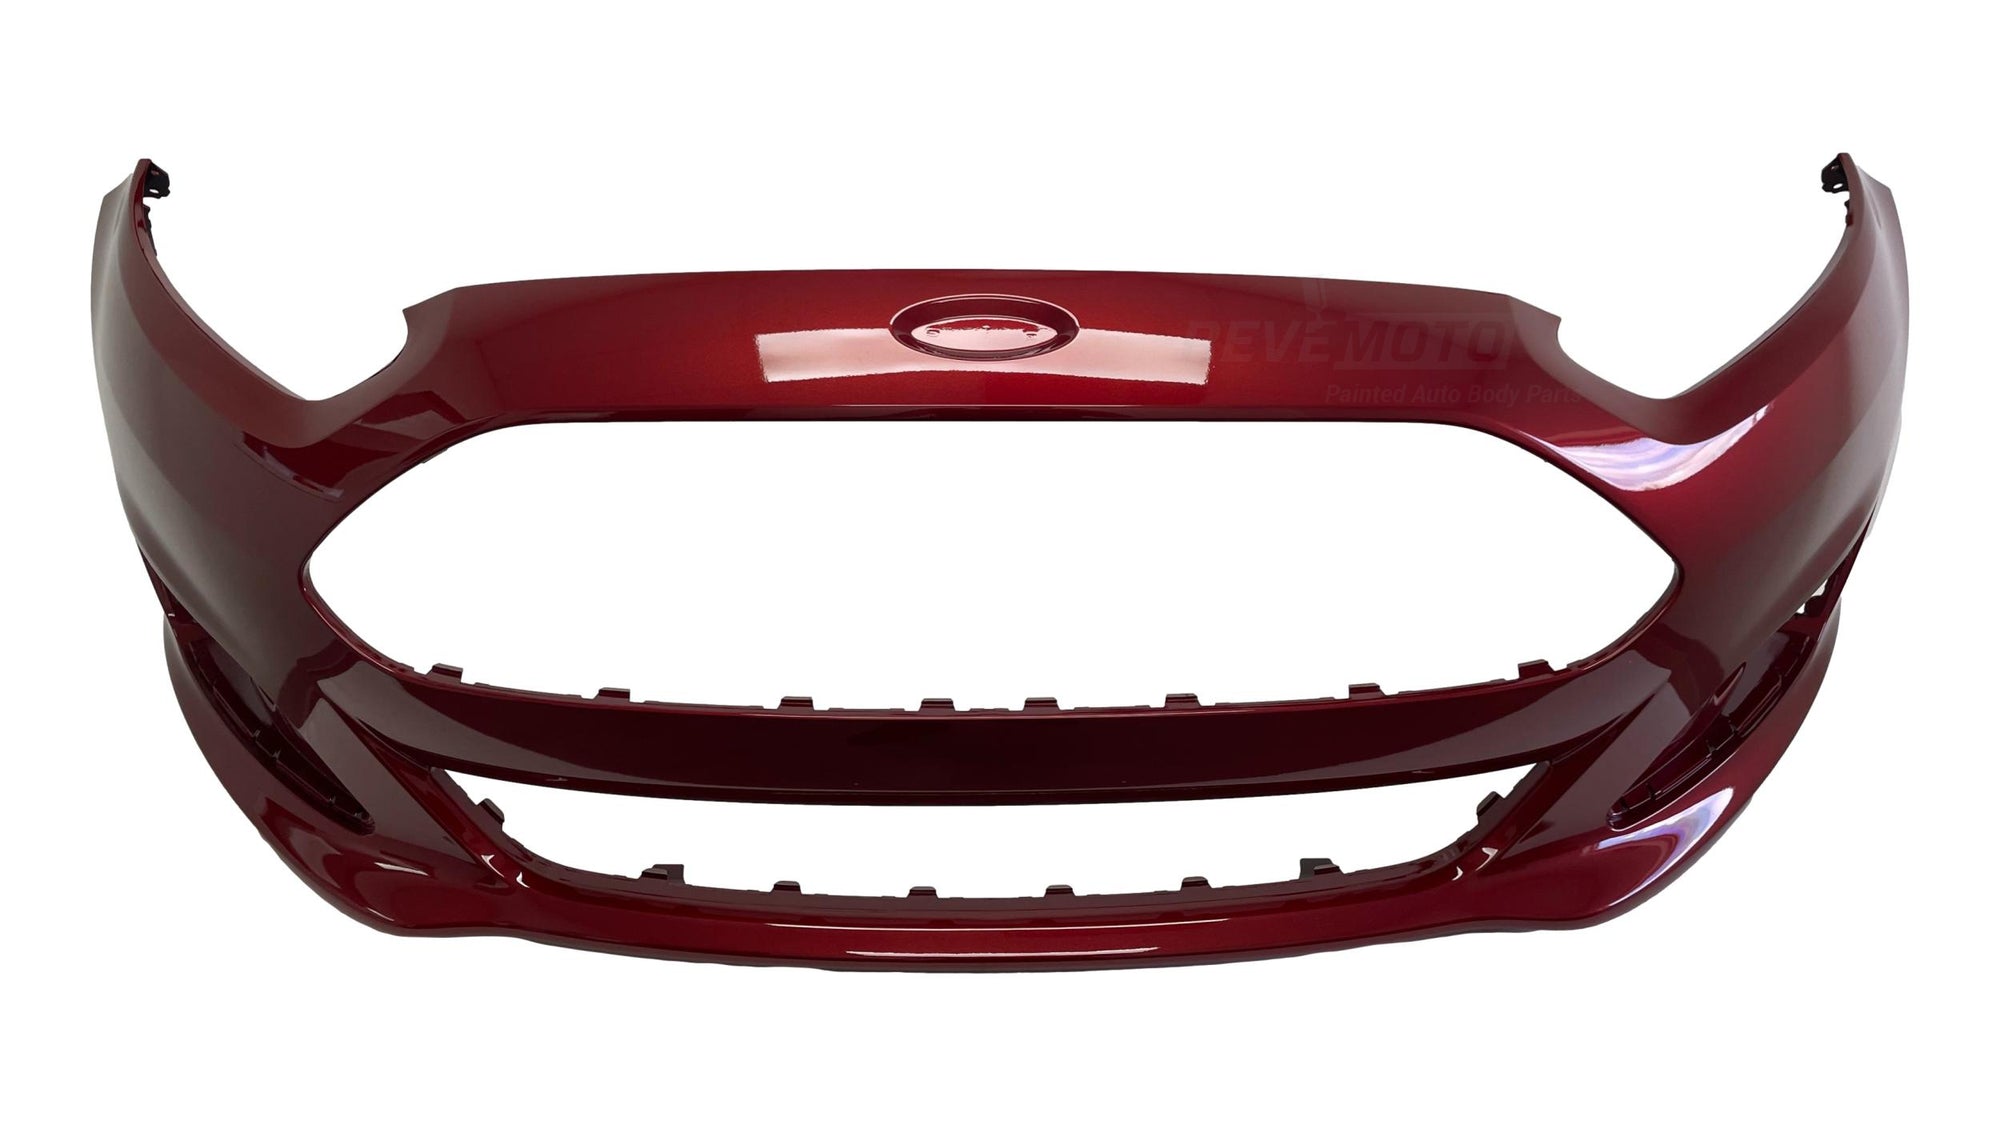 2014-2019 Ford Fiesta Front Bumper Painted Hatchback Sedan WITHOUT Rocker Molding Kit Ruby Red Metallic (RR)¬†D2BZ17757AB FO1000693